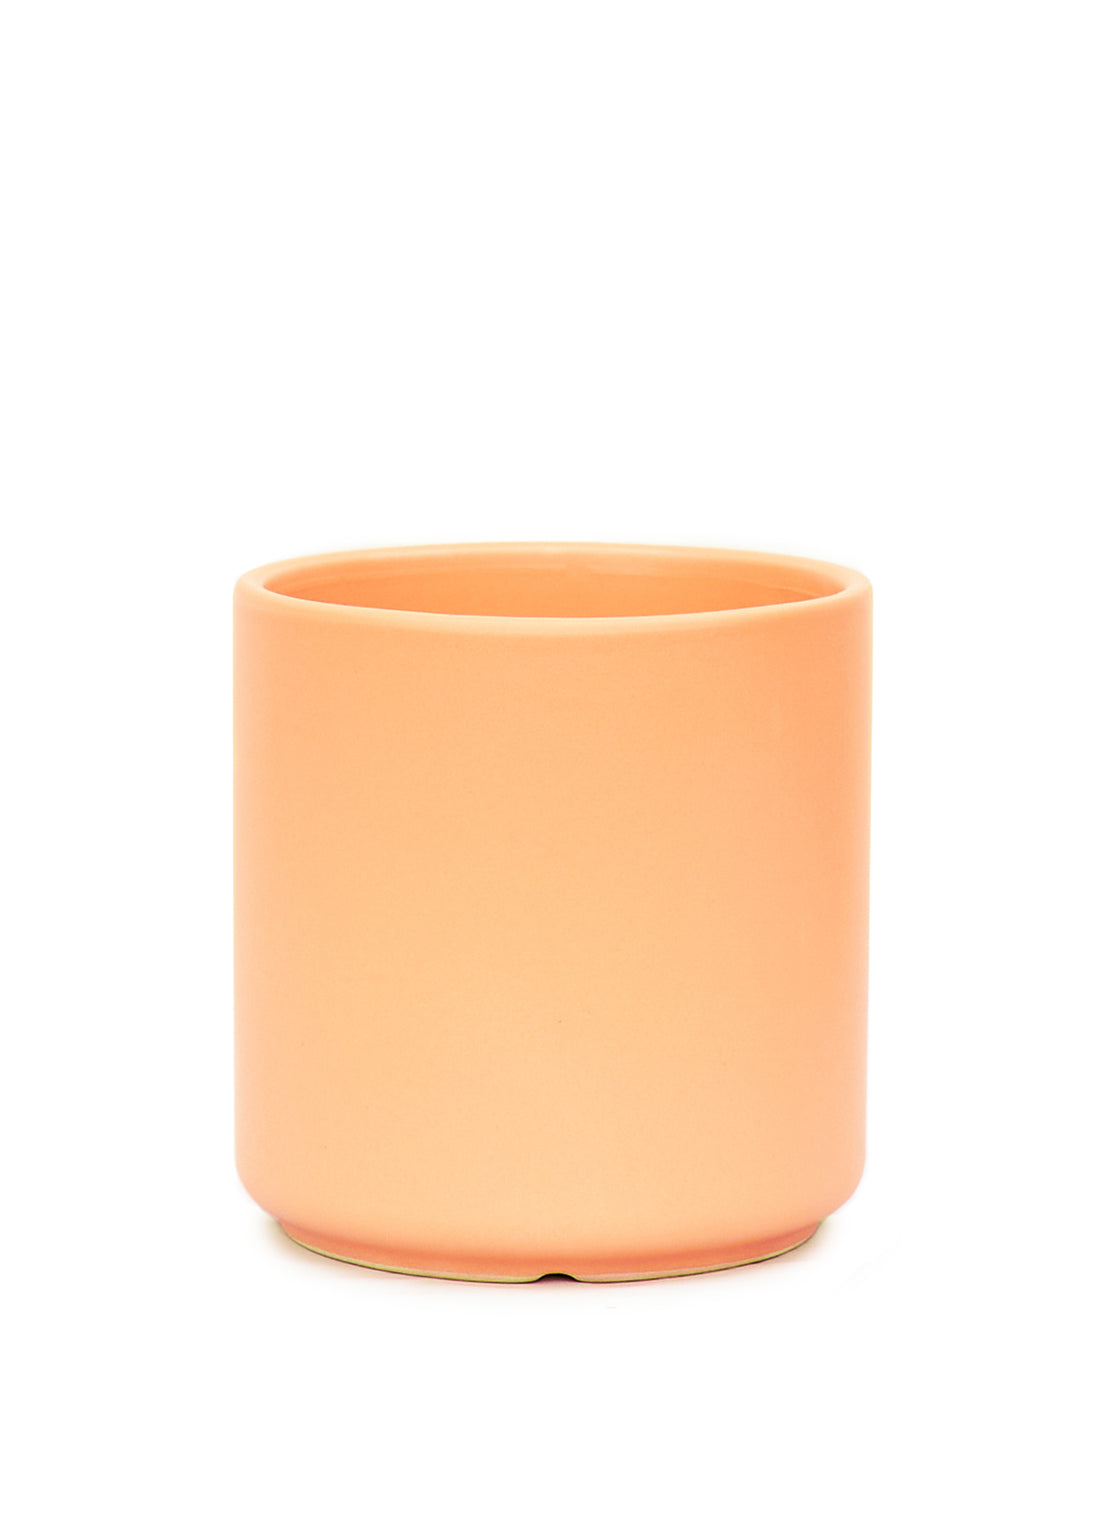 Cylindrical Ceramic Planter, Peach 5&quot; Wide - Hive Plants - 